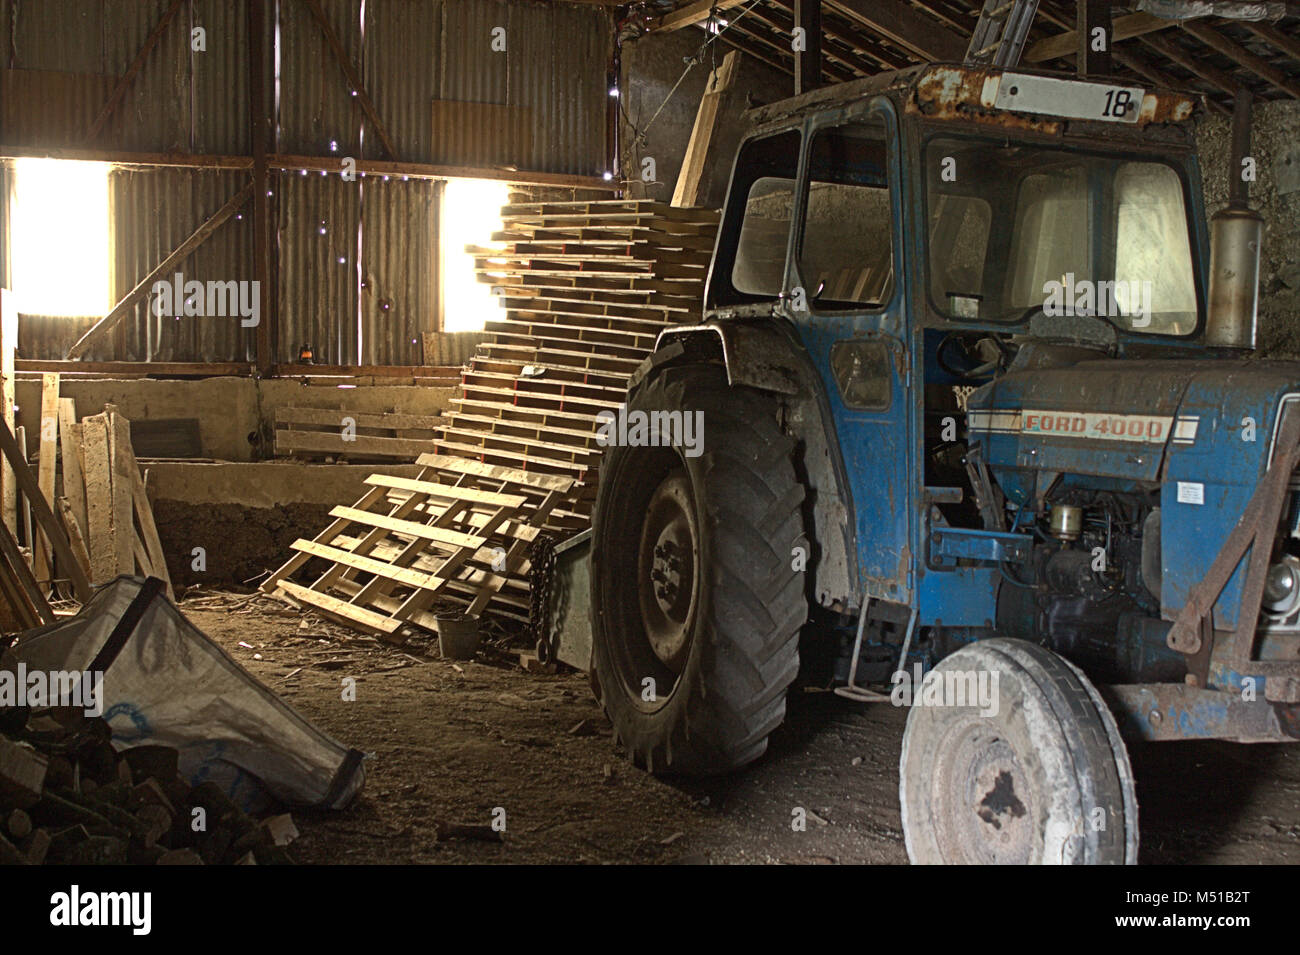 Ford Tractor being refurbished in a barn. Its early morning and the barn has sunlight streaming in through the windows. Stock Photo